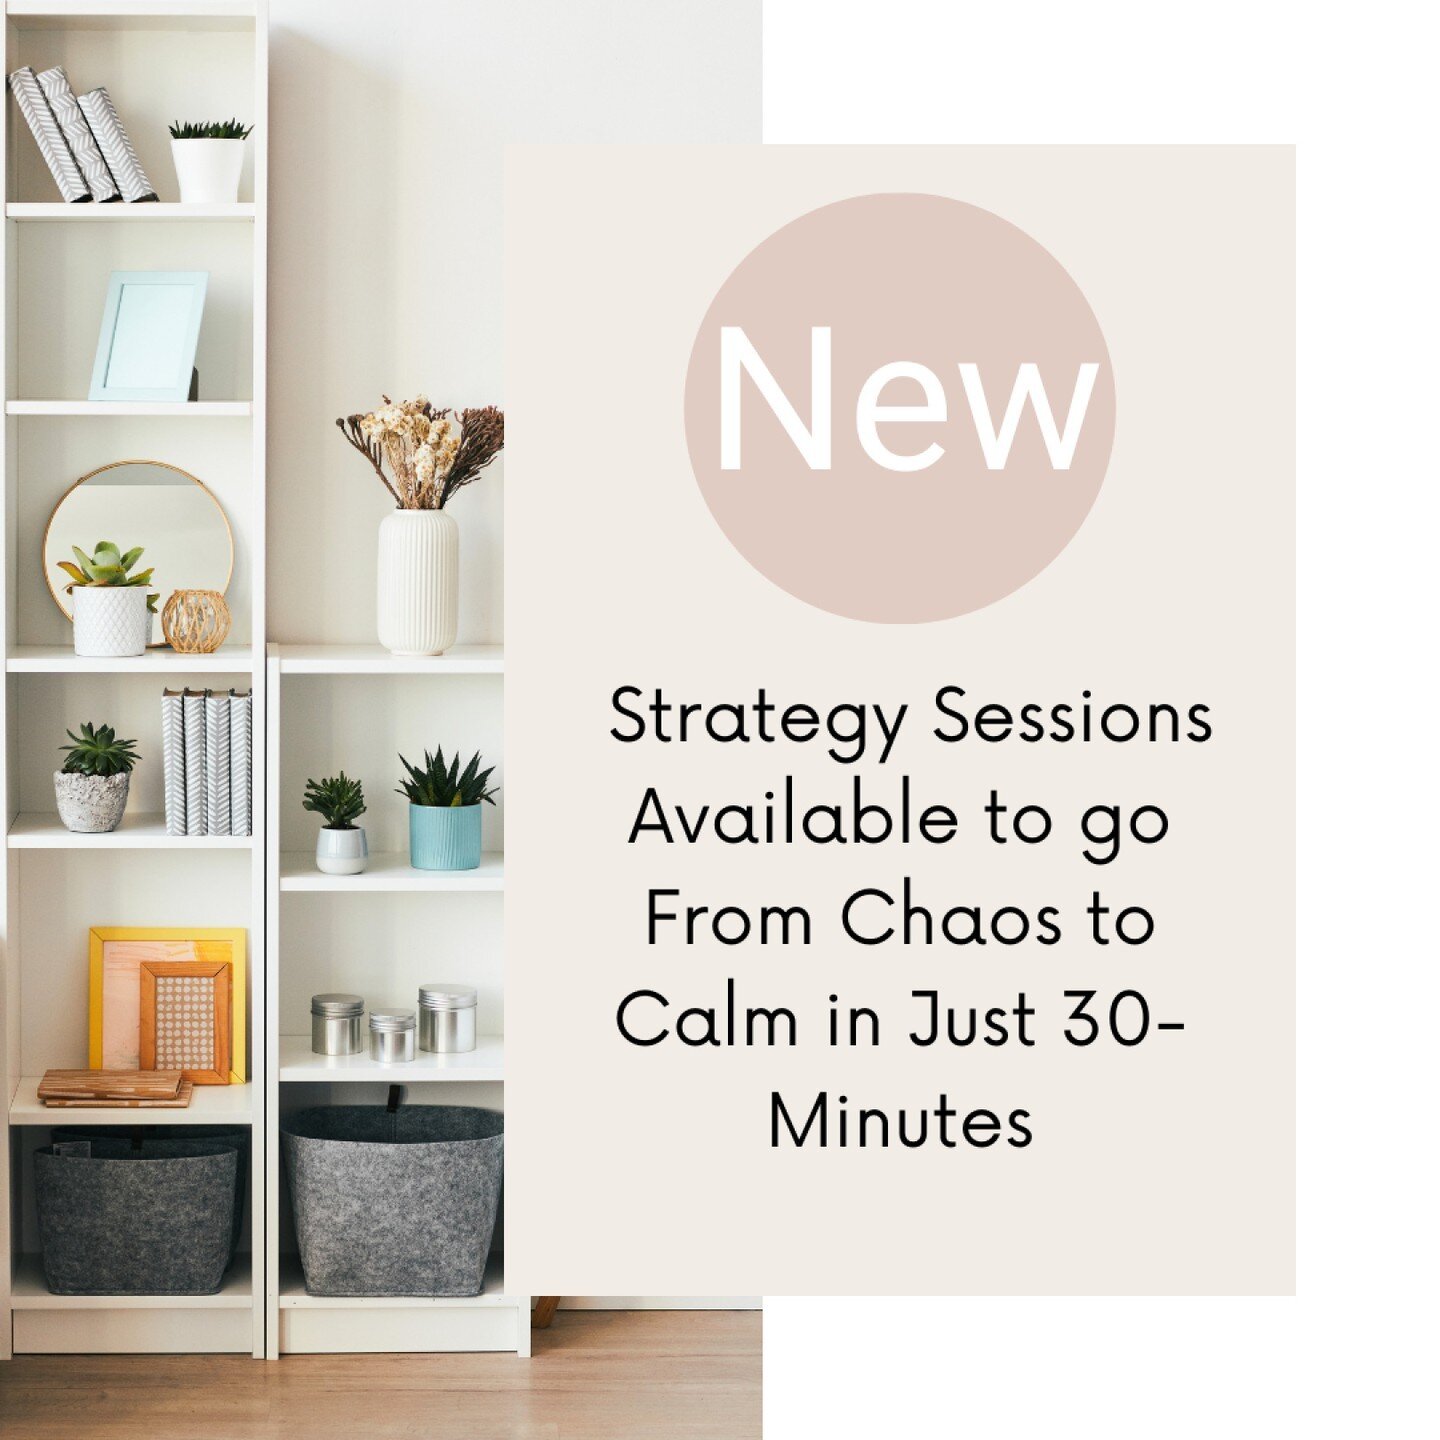 Tired of spending hours searching through clutter? Our 30-minute Strategy Sessions are the solution! 

Discover the power of organized living and reclaim your home in just 30 minutes! 

Learn the art of decluttering and organization, bidding farewell